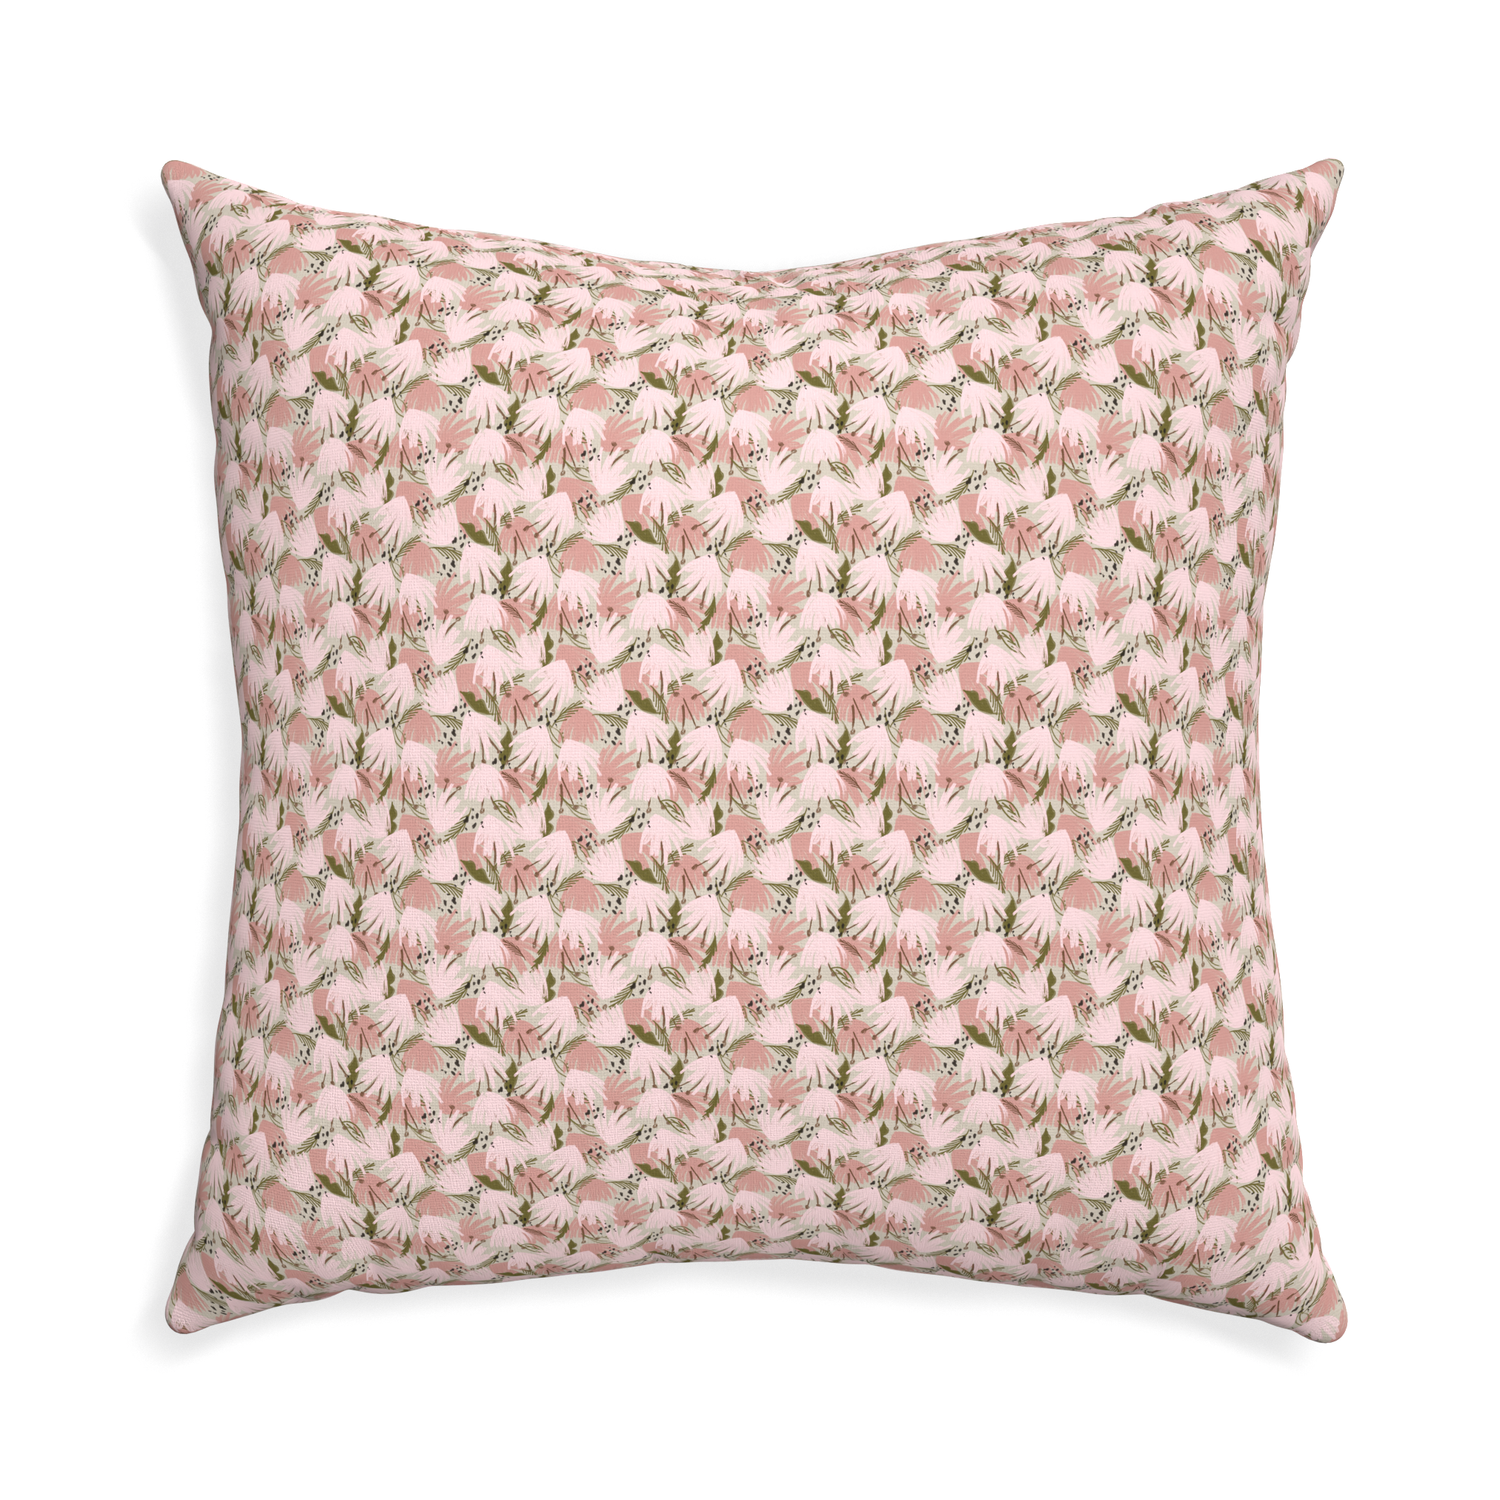 Euro-sham eden pink custom pink floralpillow with none on white background